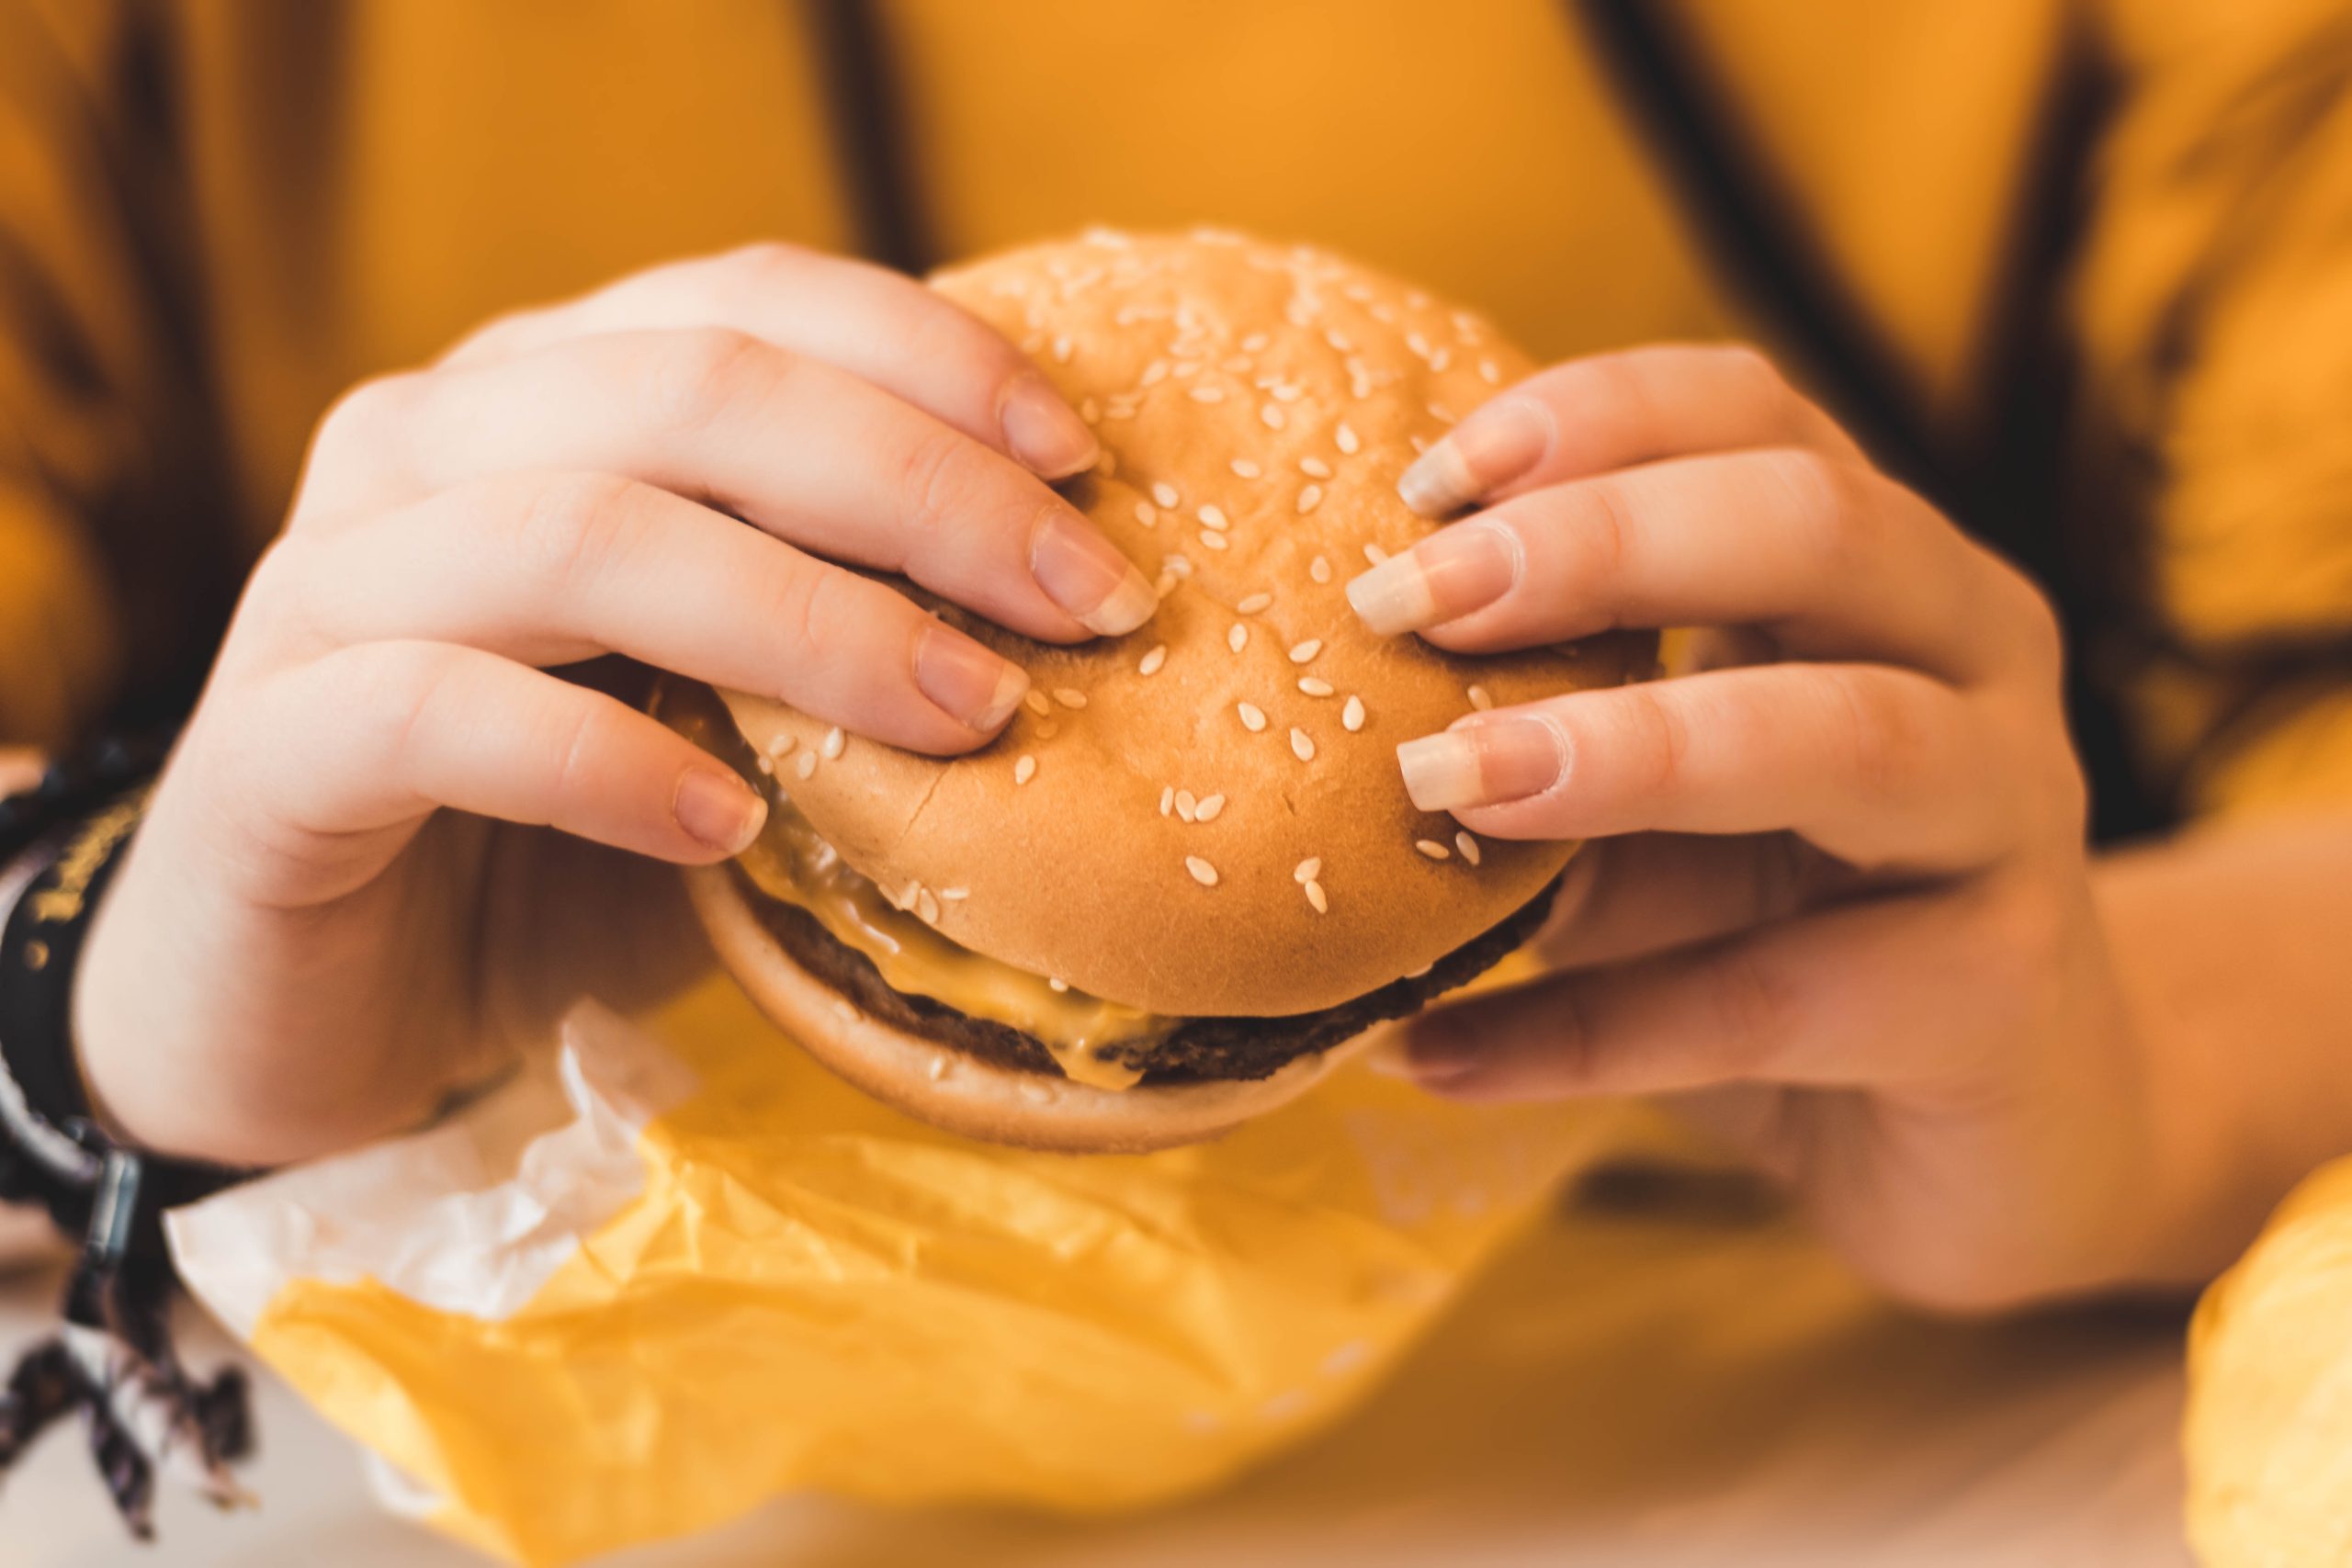 Can fast-food restaurants help drive plant-based food consumption?